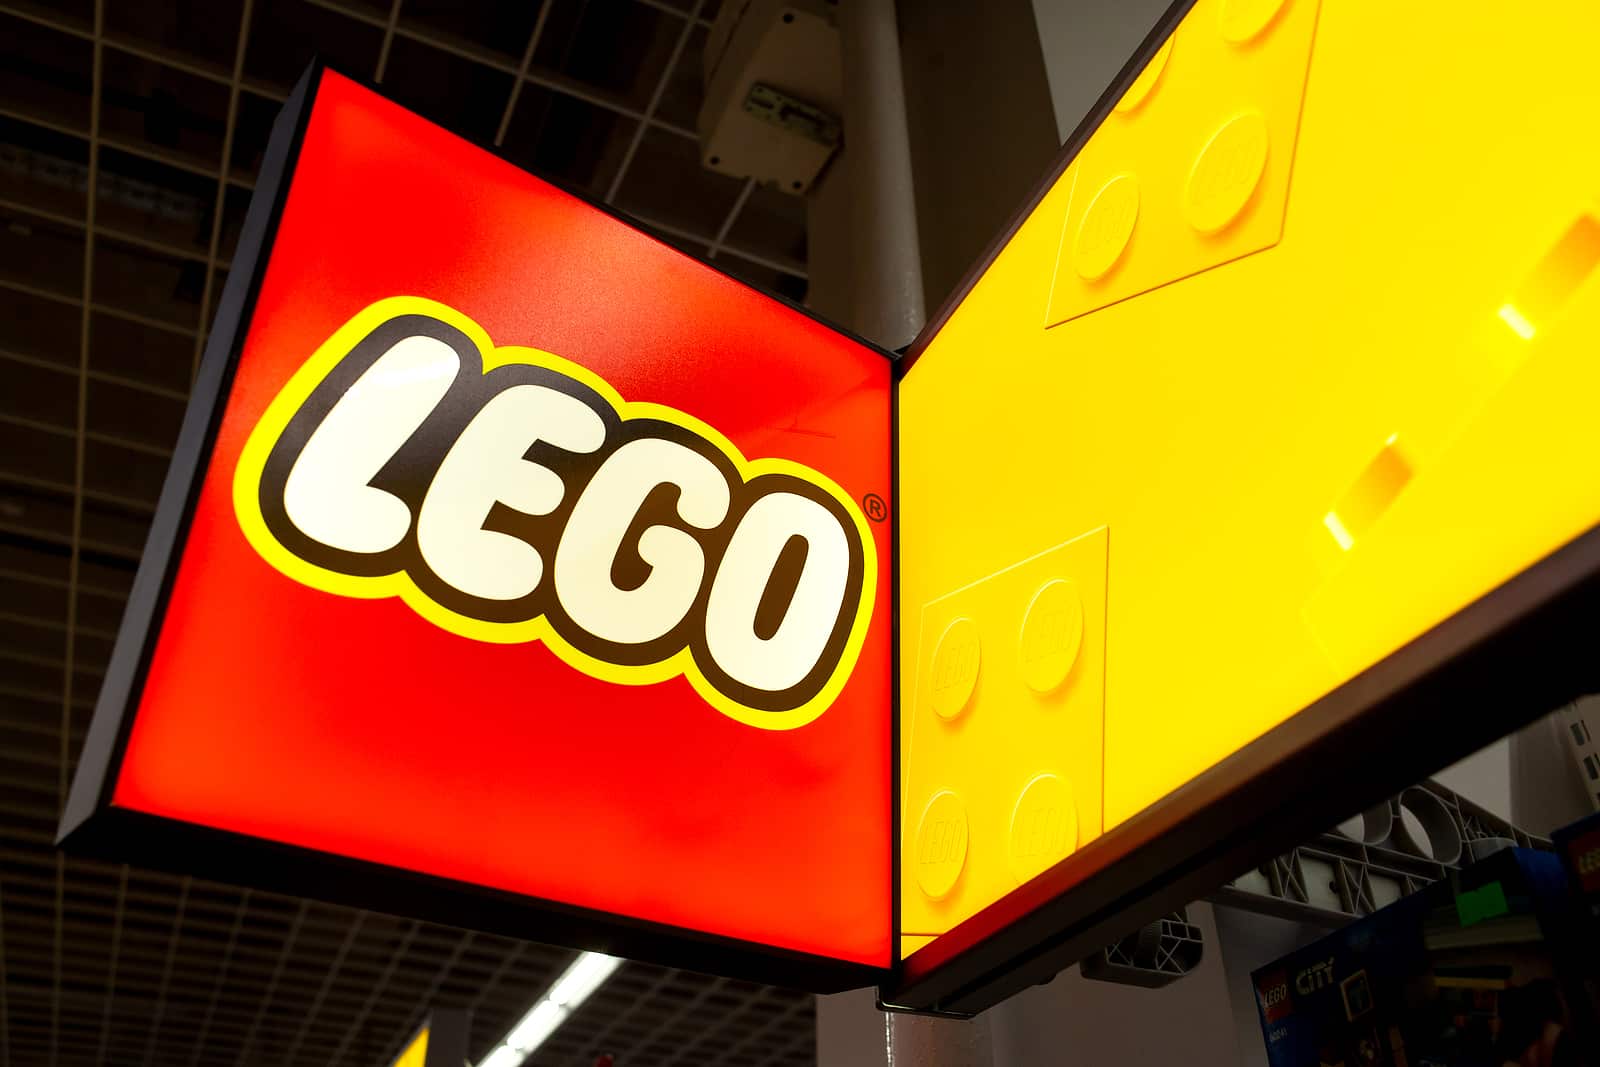 Lego Sign In The Store.